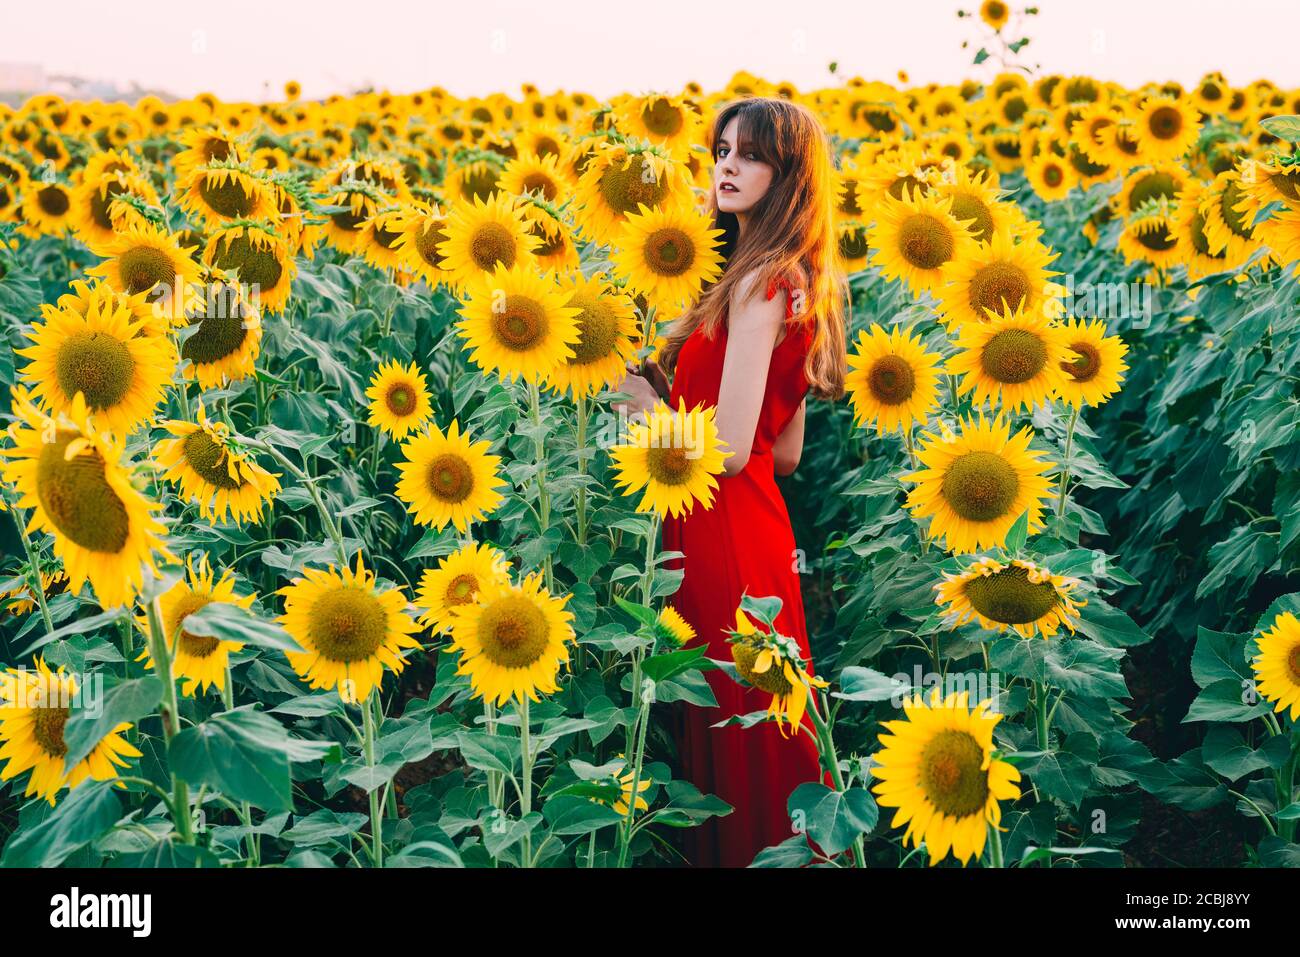 woman with red dress in sunflowers field Stock Photo